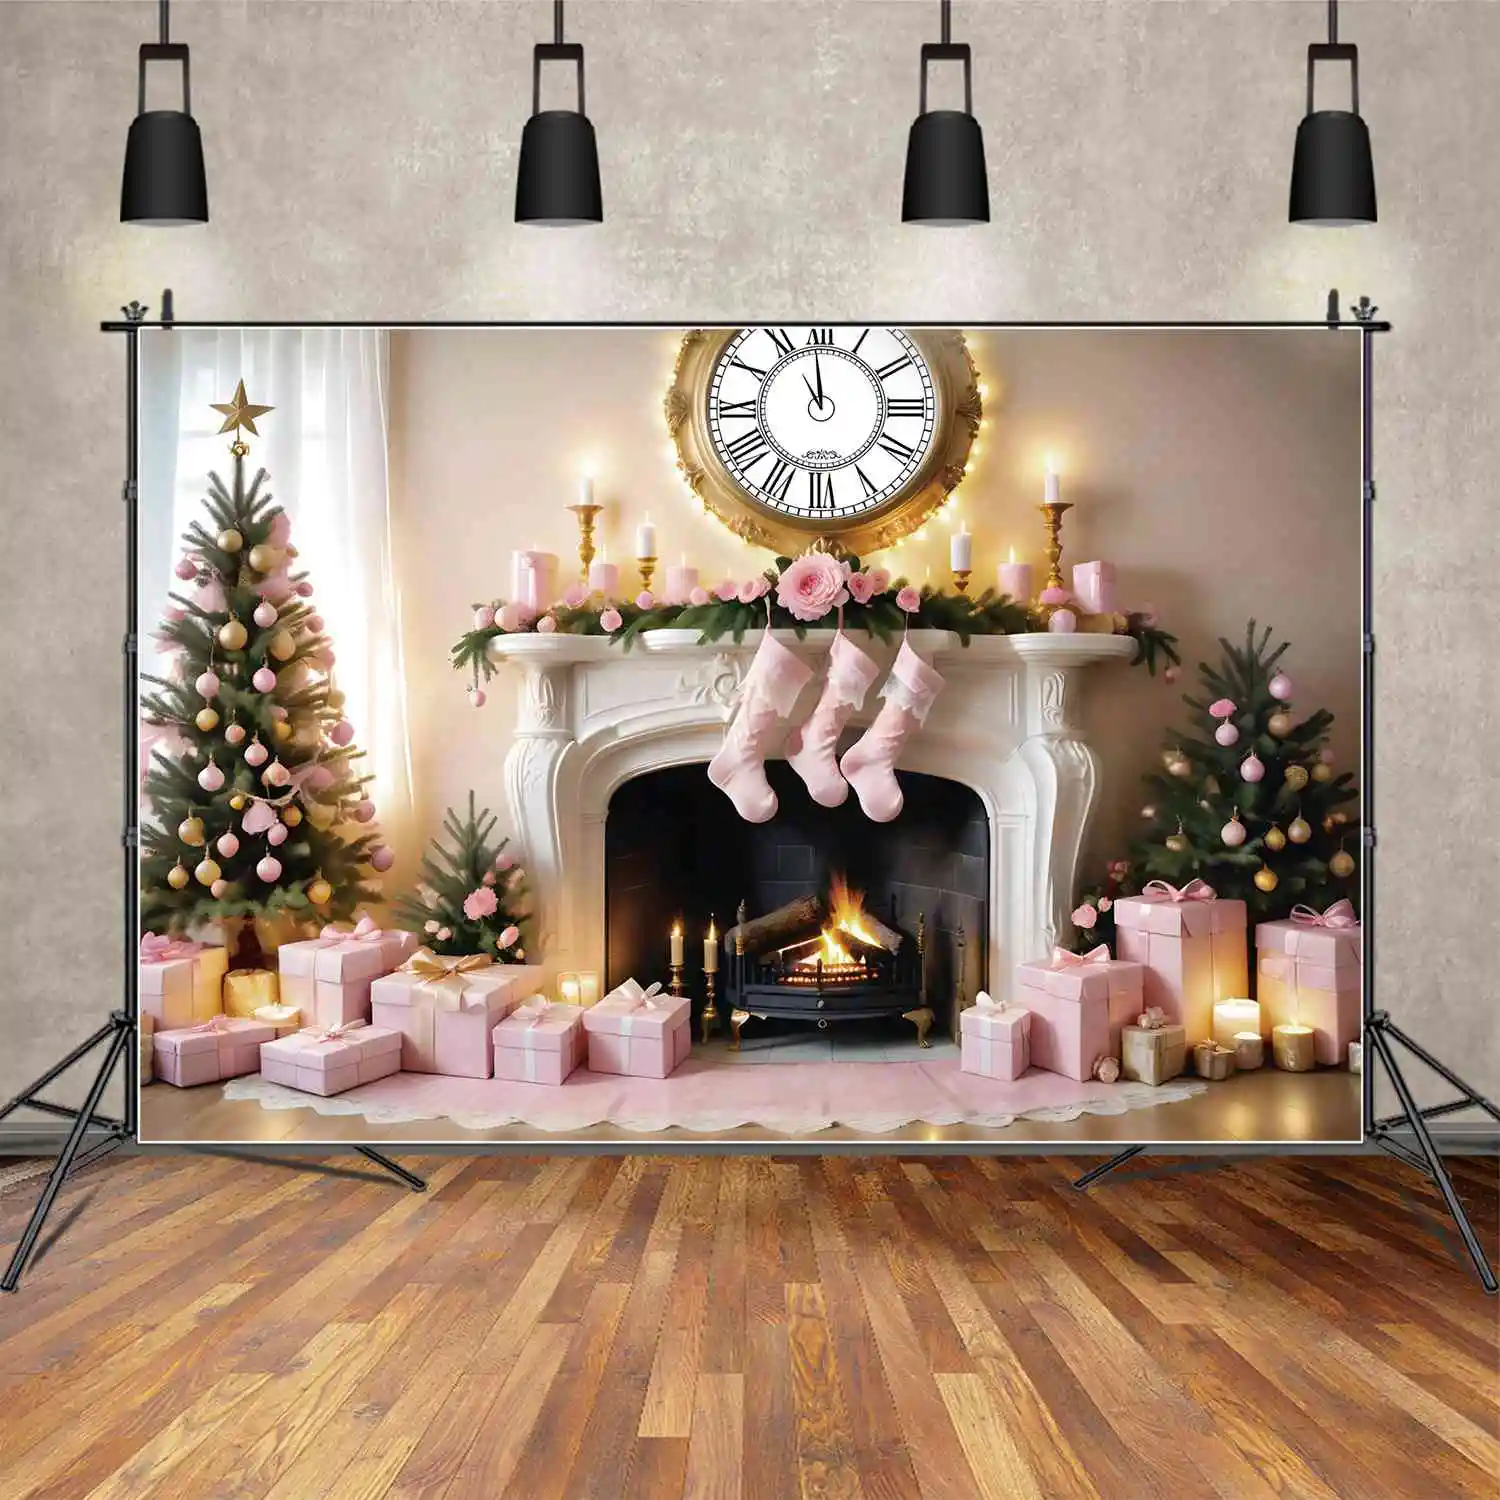 

MOON.QG Backdrop Pink Christmas Fireplace Backgrounds Novelty Ornaments Decorations for Home Photozone Photography Accessories